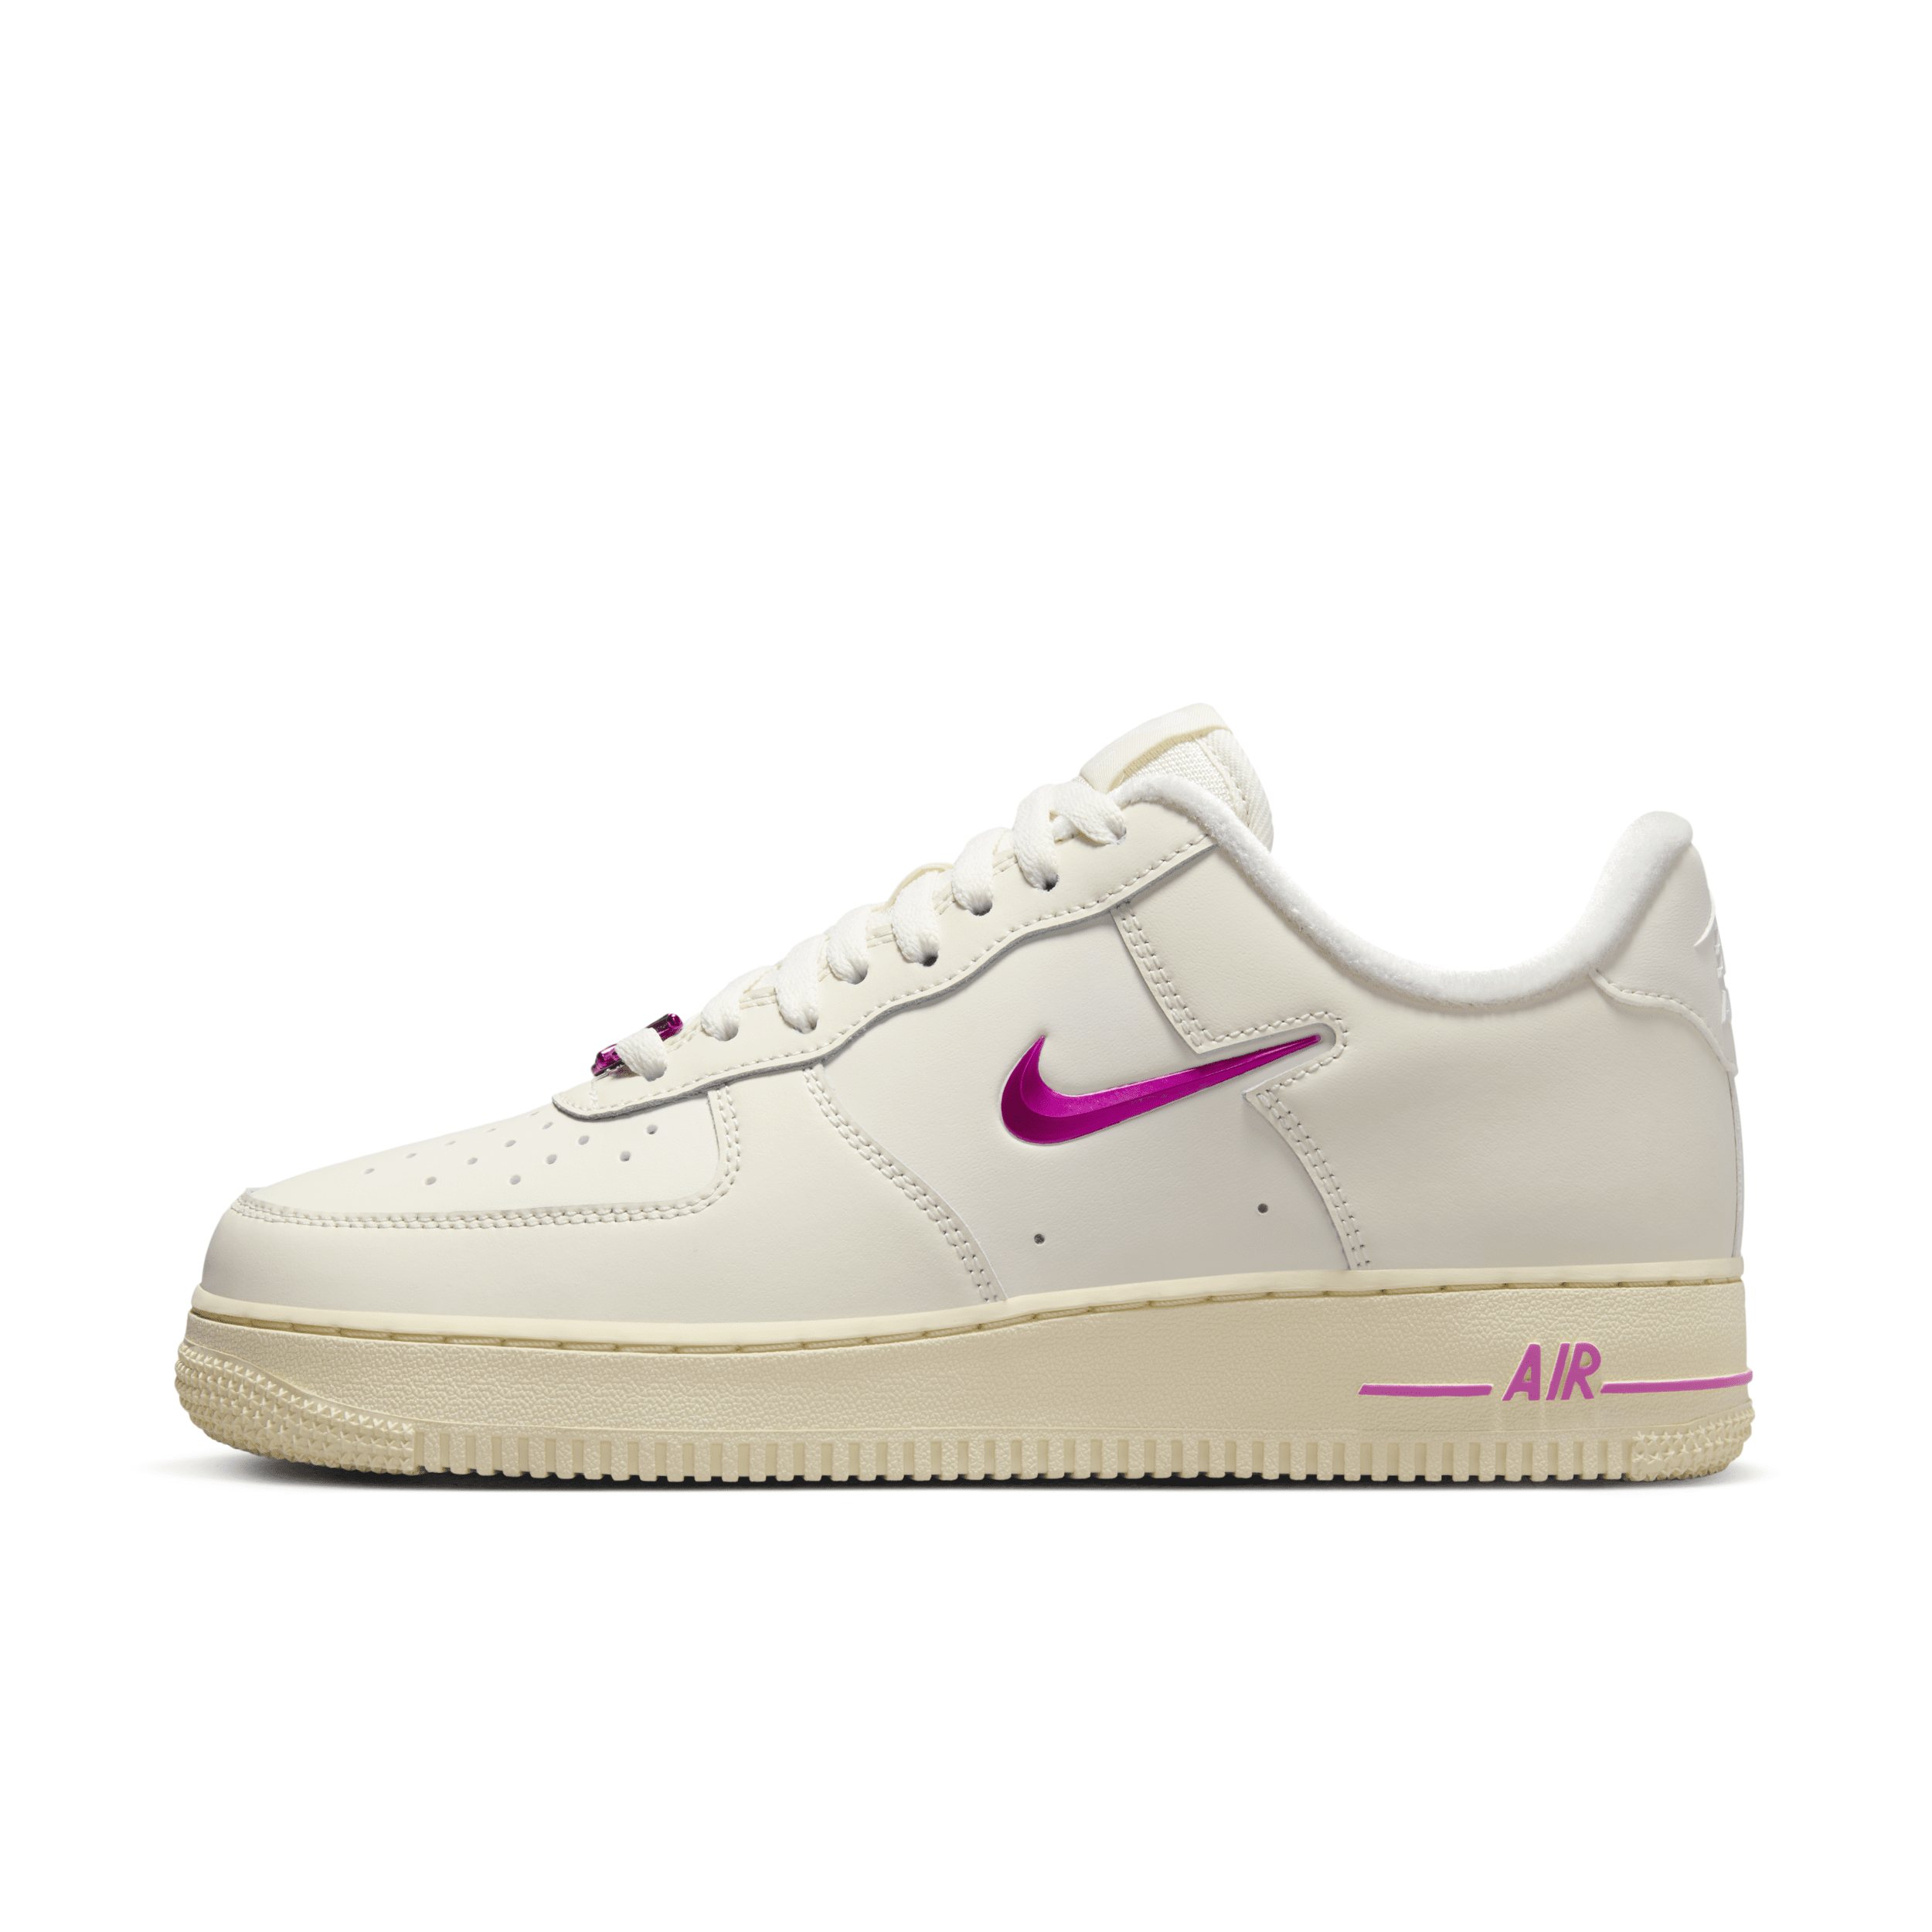 Nike Women's Air Force 1 '07 Shoes in White, Size: 5.5 | FB8251-101